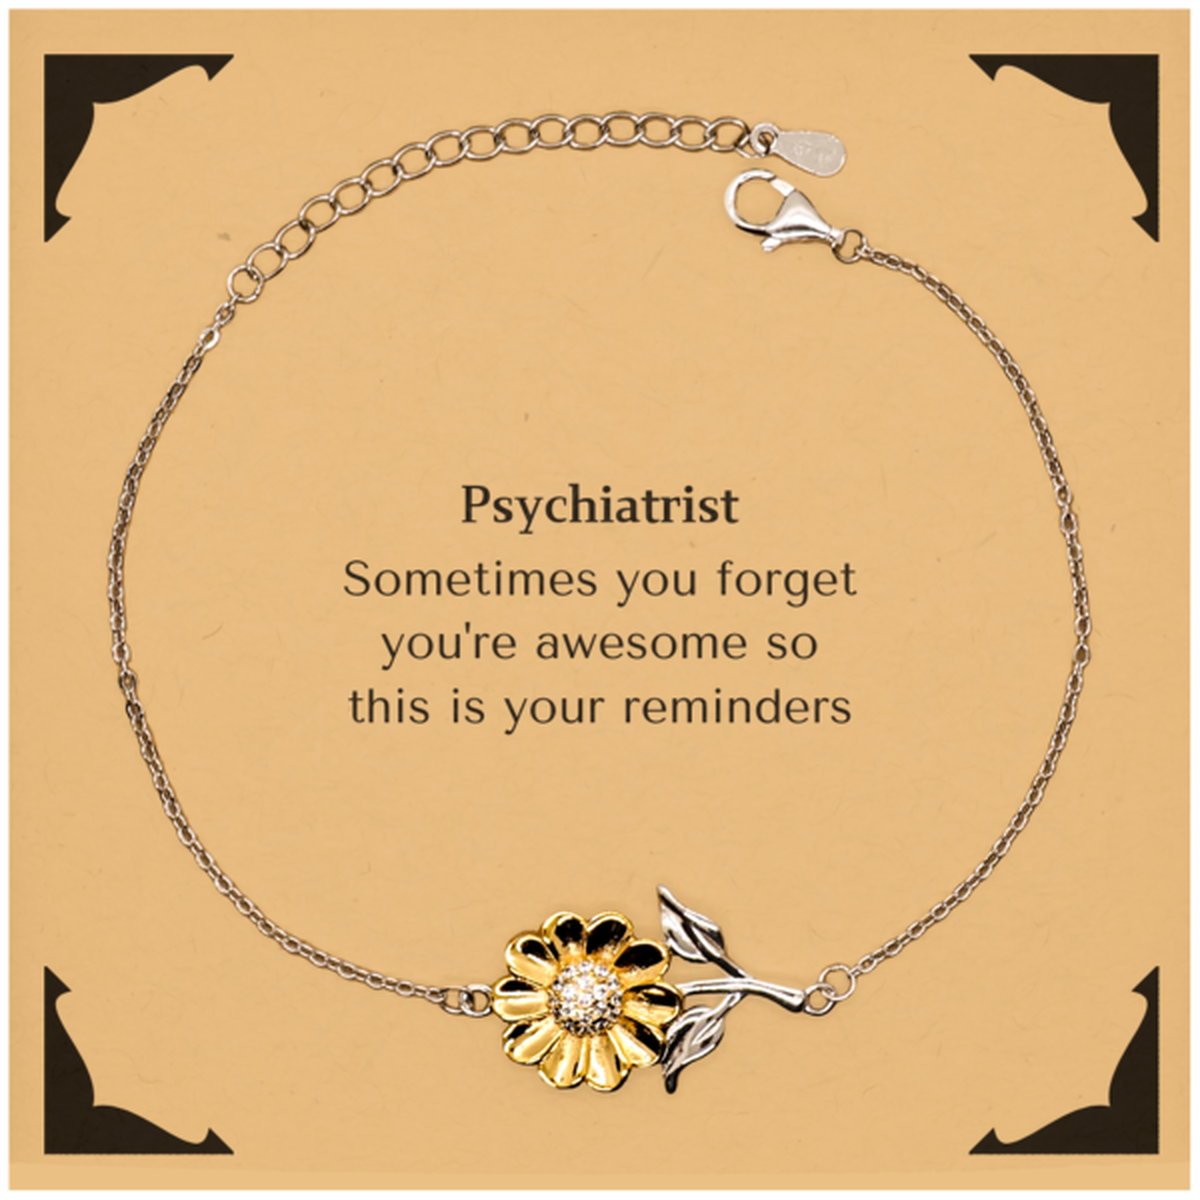 Sentimental Psychiatrist Sunflower Bracelet, Psychiatrist Sometimes you forget you're awesome so this is your reminders, Graduation Christmas Birthday Gifts for Psychiatrist, Men, Women, Coworkers